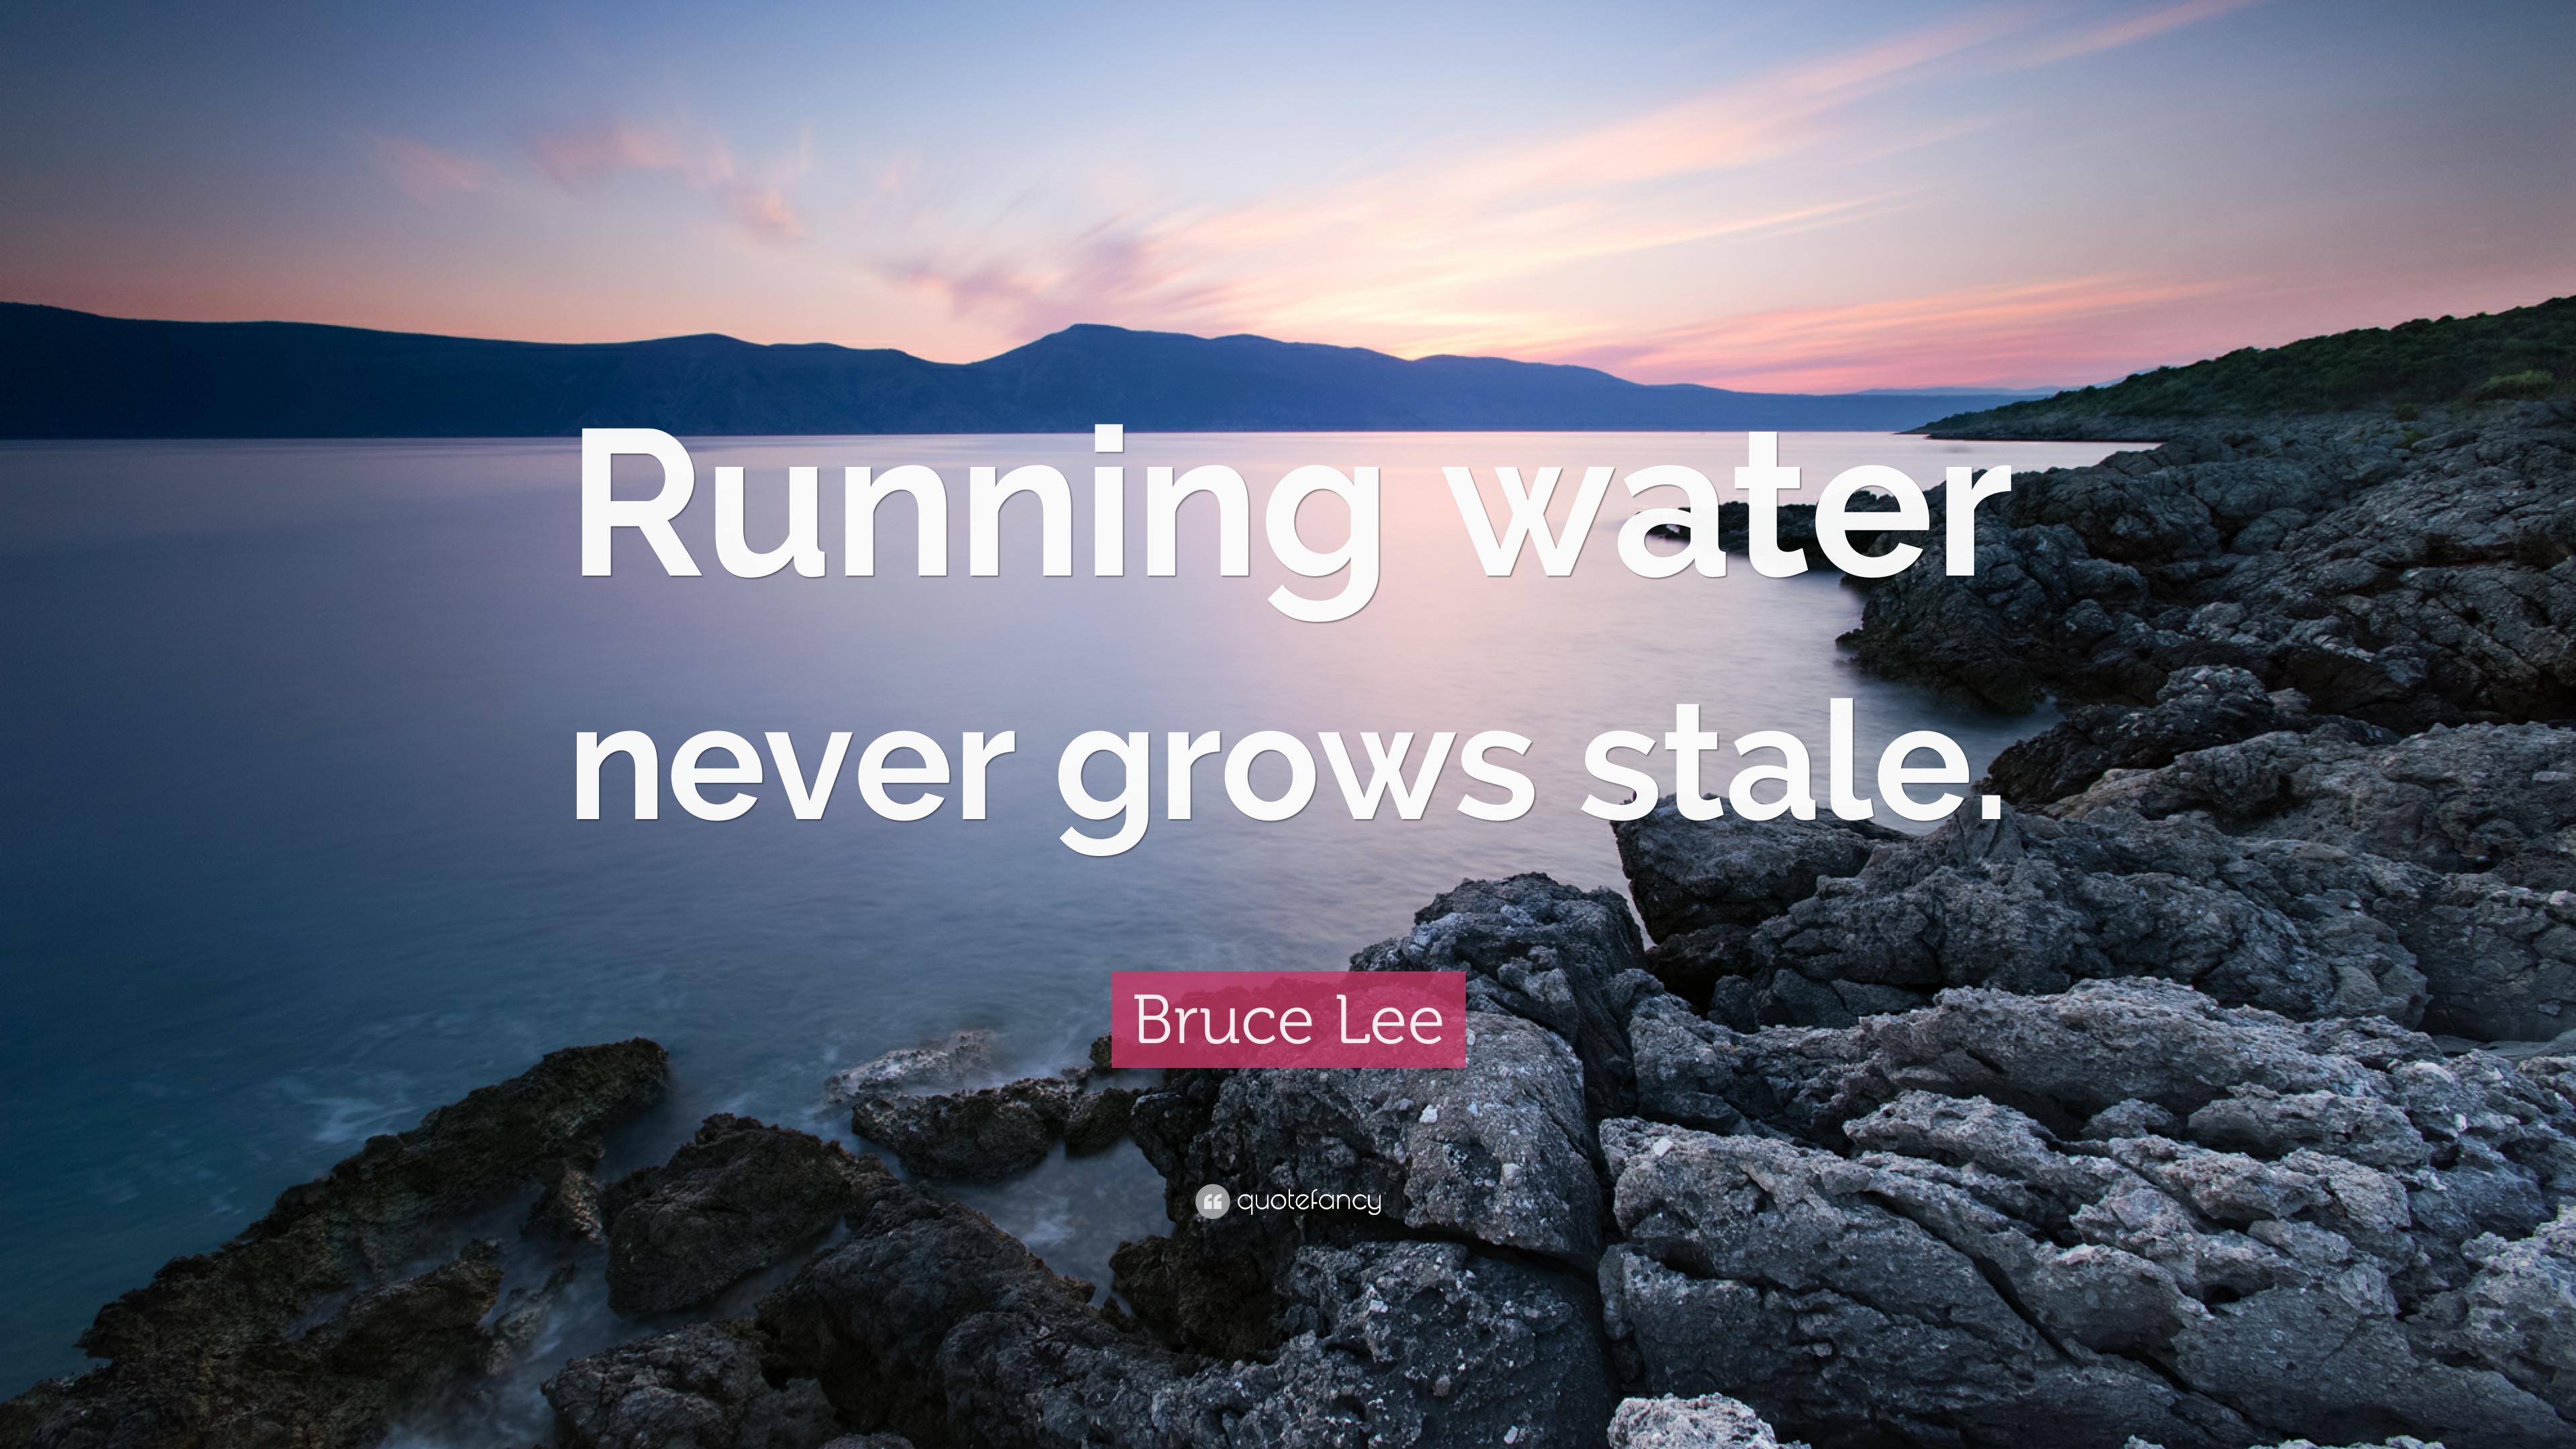 Bruce Lee Quote: “Running water never grows stale.” (7 wallpapers ...